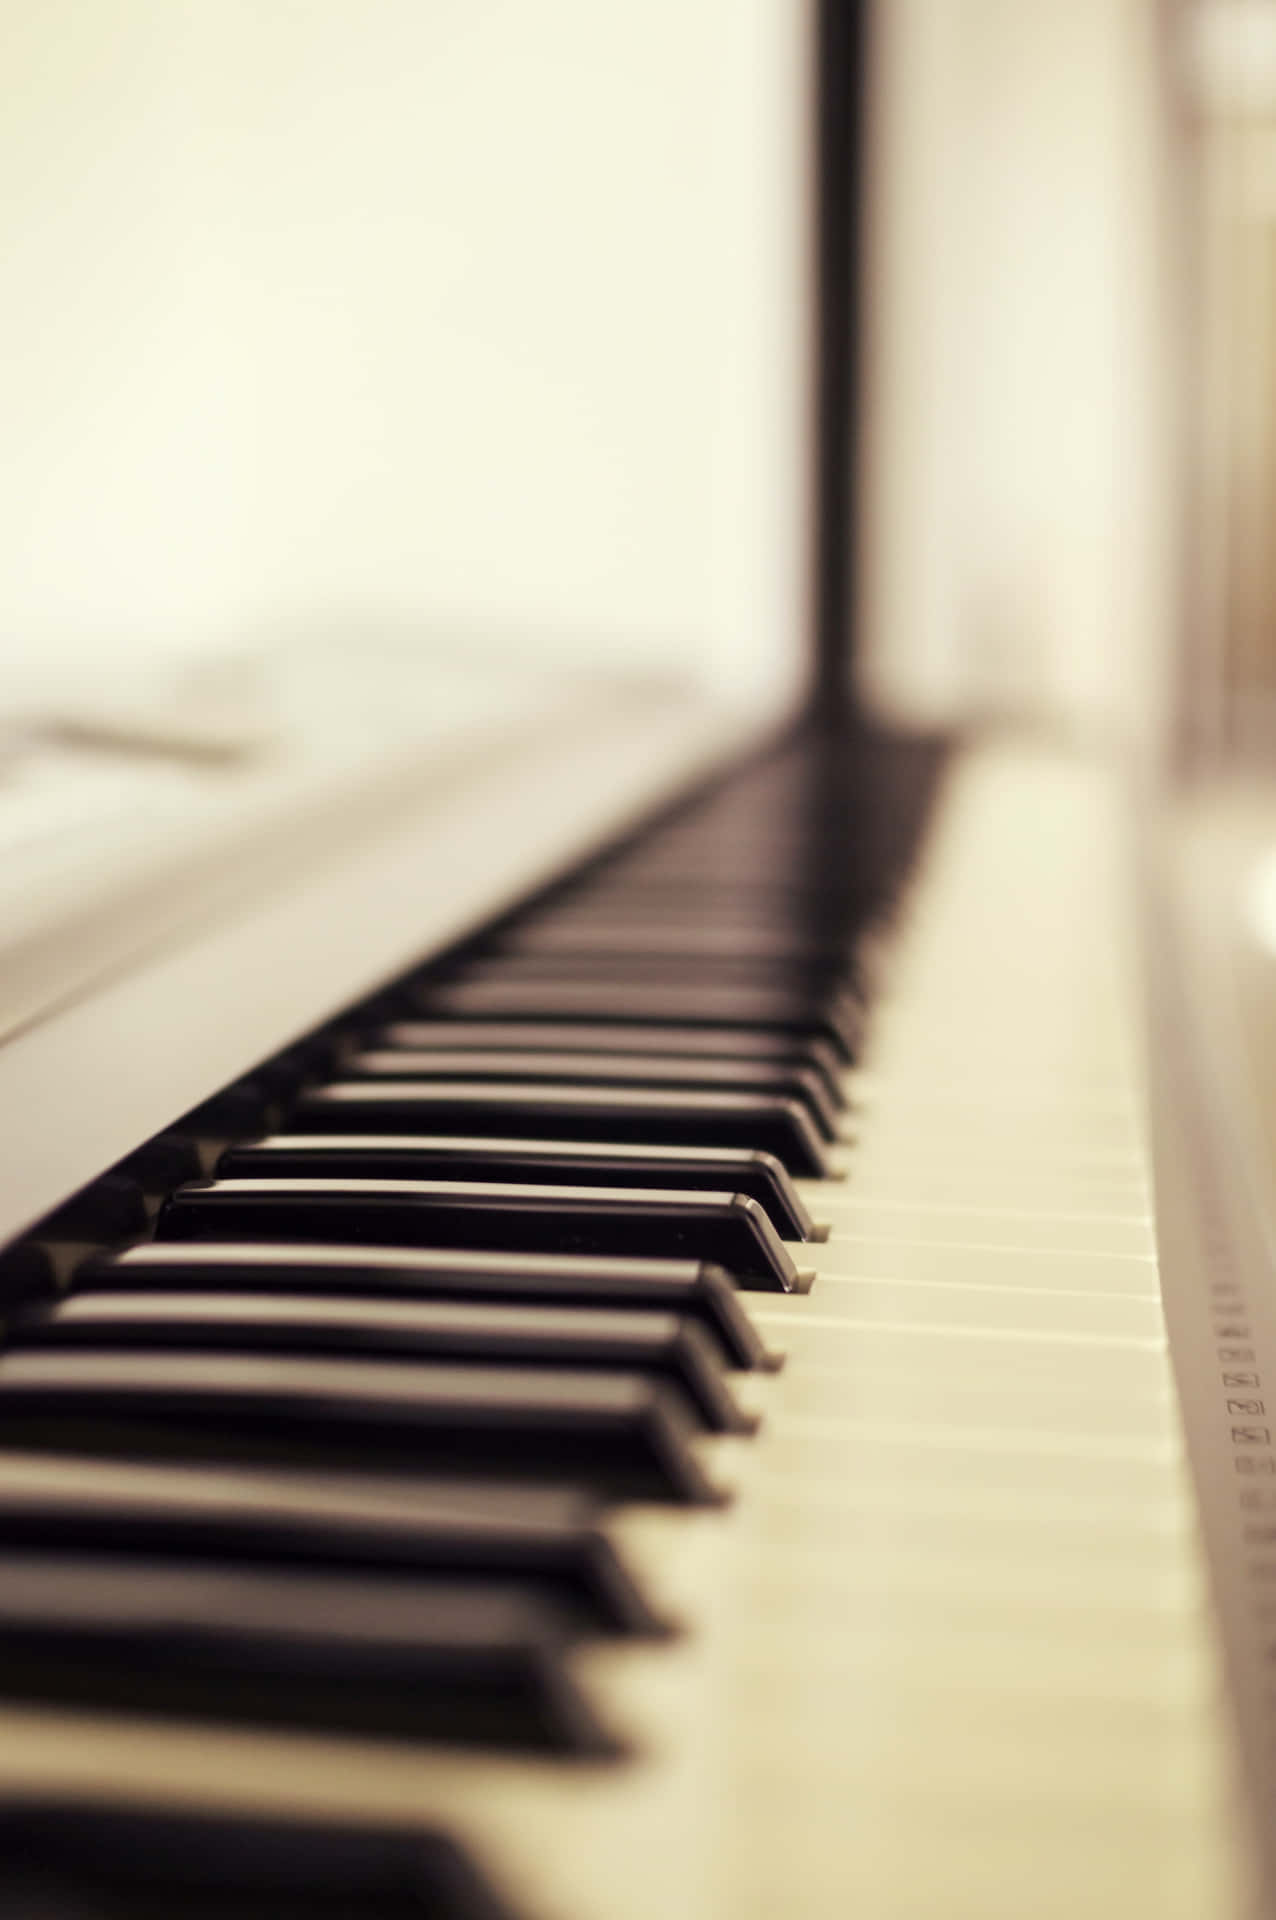 Musical Instrument Piano Keyboard Close-up Picture